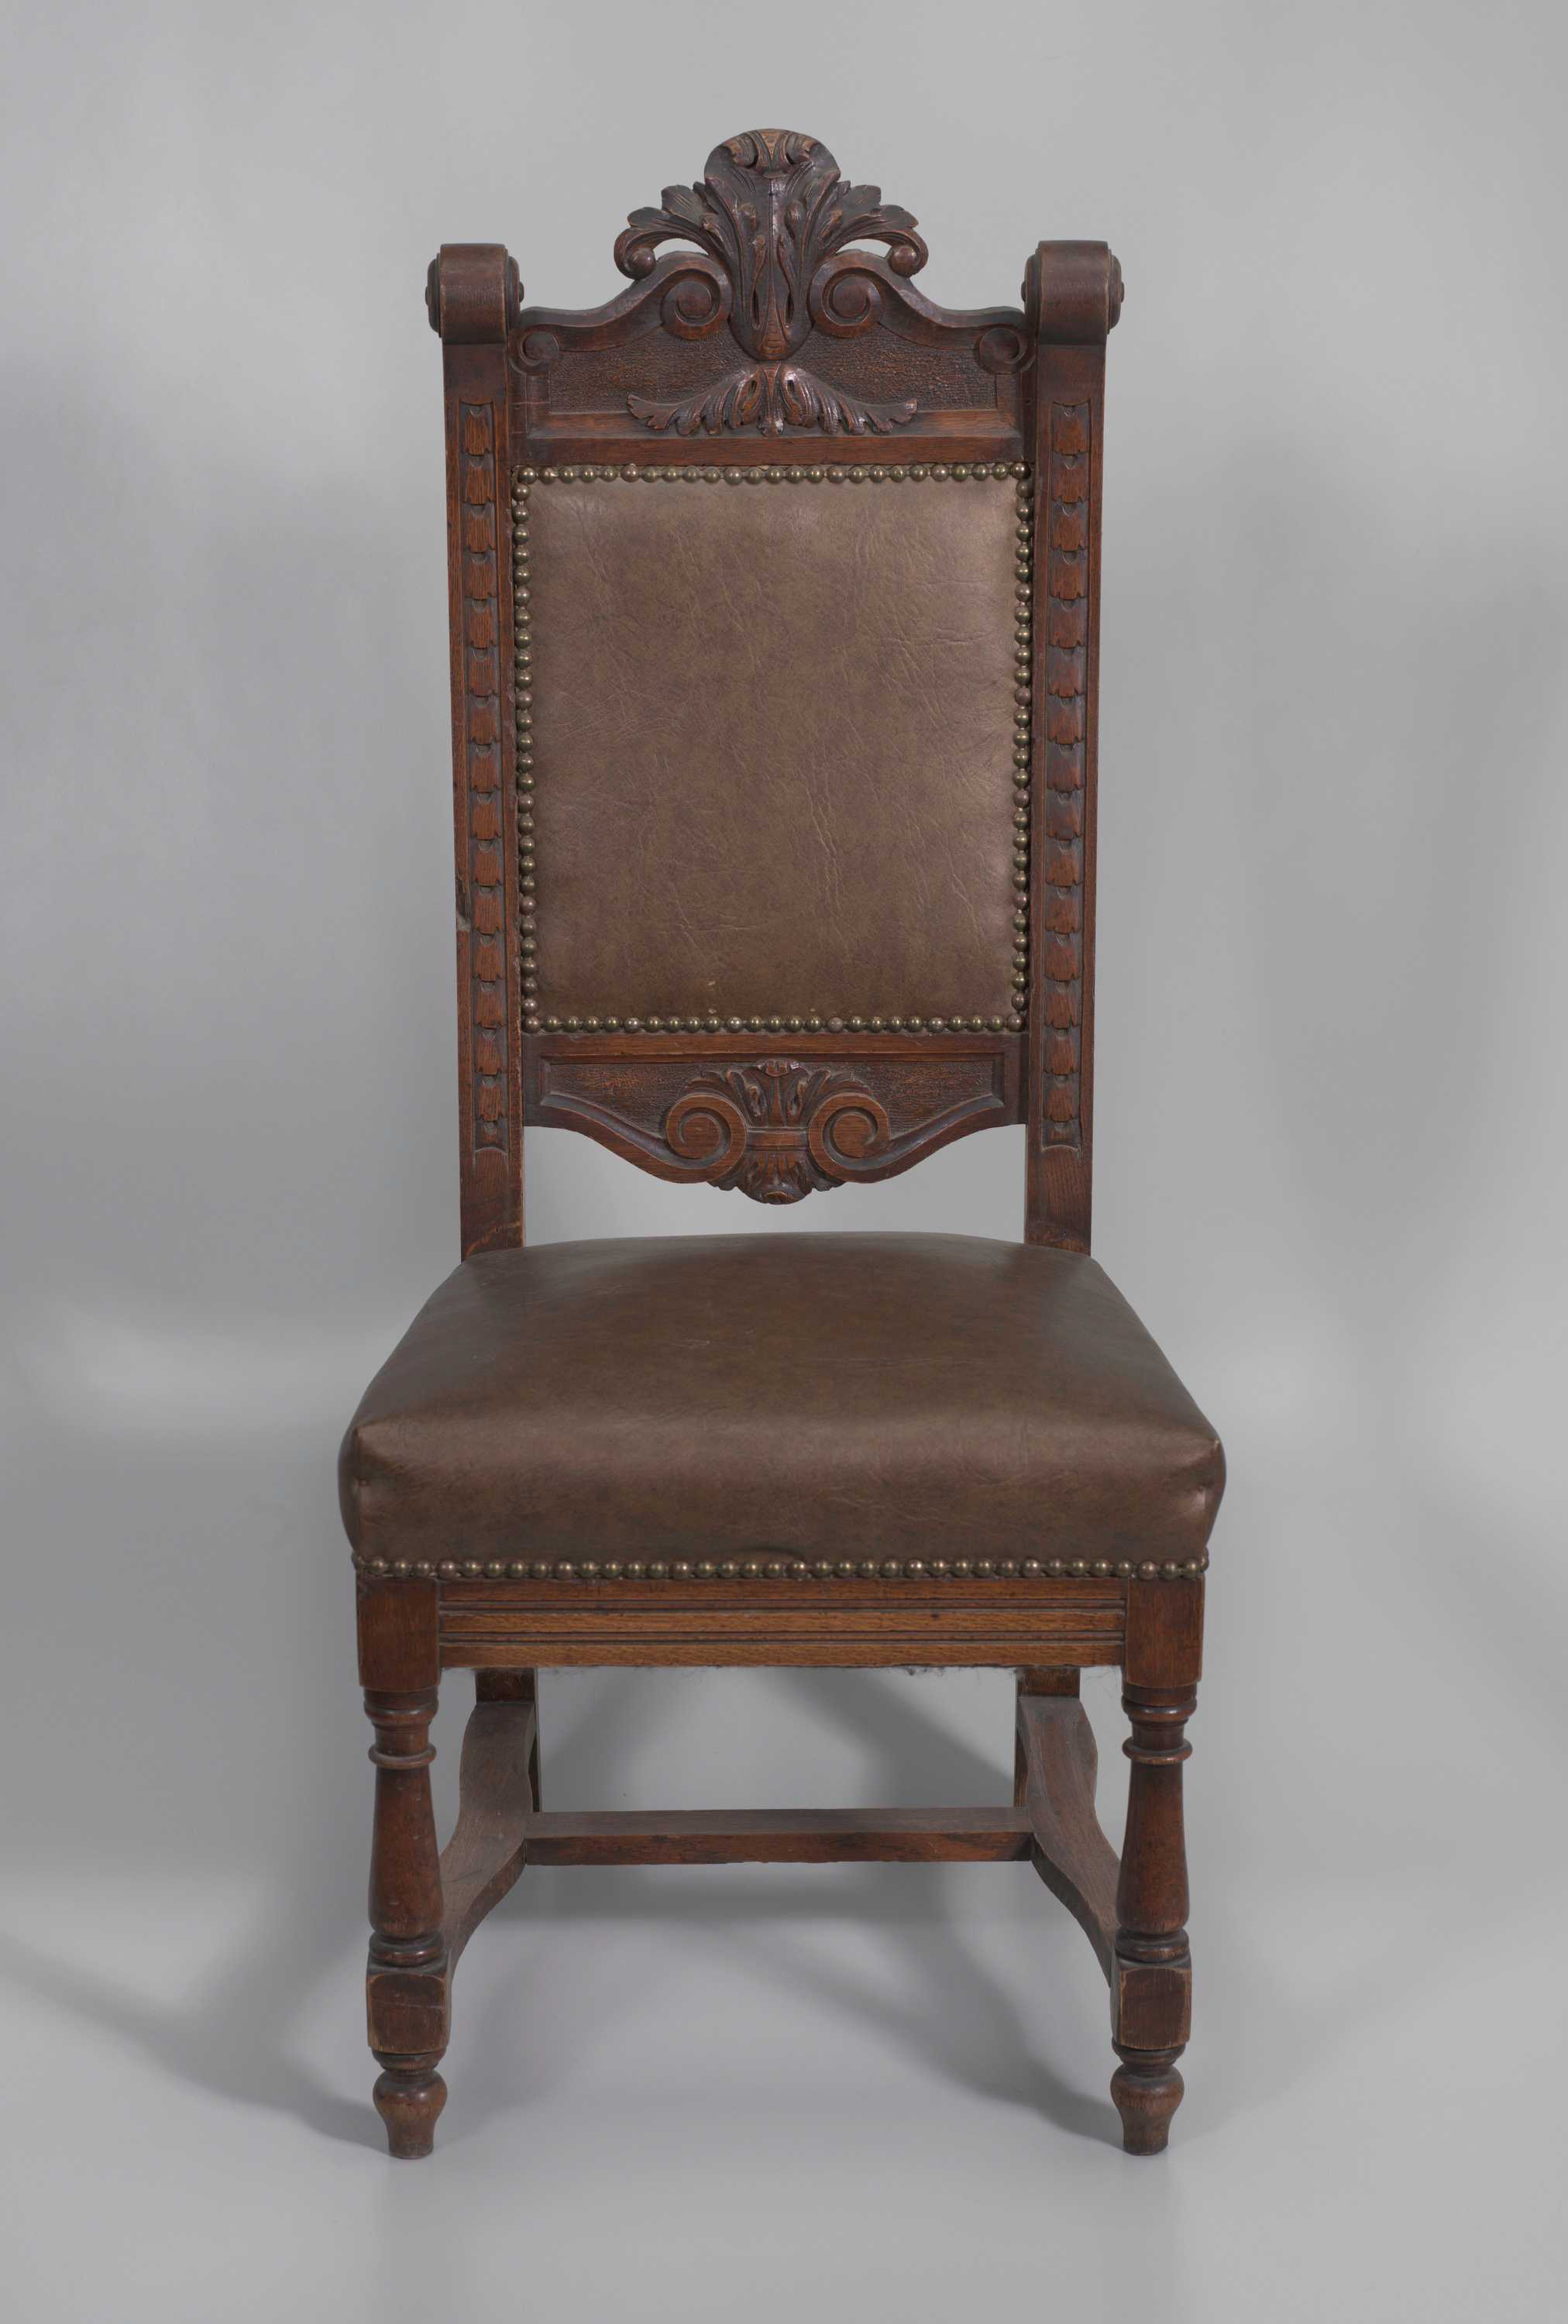 A wood pulpit chair with a dark finish. The chair has four legs with the rear legs extending the full height of the seat back. The front legs are turned with varying geometric shapes and are topped with the seat. Connecting the front legs to the back legs are two curved stretcher bars. Between the two stretcher bars is an additional support bar. The seat cushion and chair back are padded with faux-leather covers. The covers are adhered by metal studs. The chair back features a line of stylized foliage carved on the front of either side of the uprights. The uprights of the chair back are capped with scrolls. The center of the top rail of the chair features large, carved acanthus leaves in the center with scrollwork extending down either side. The bottom rail of the chair back features a similar but smaller design of acanthus leaves and scrollwork.